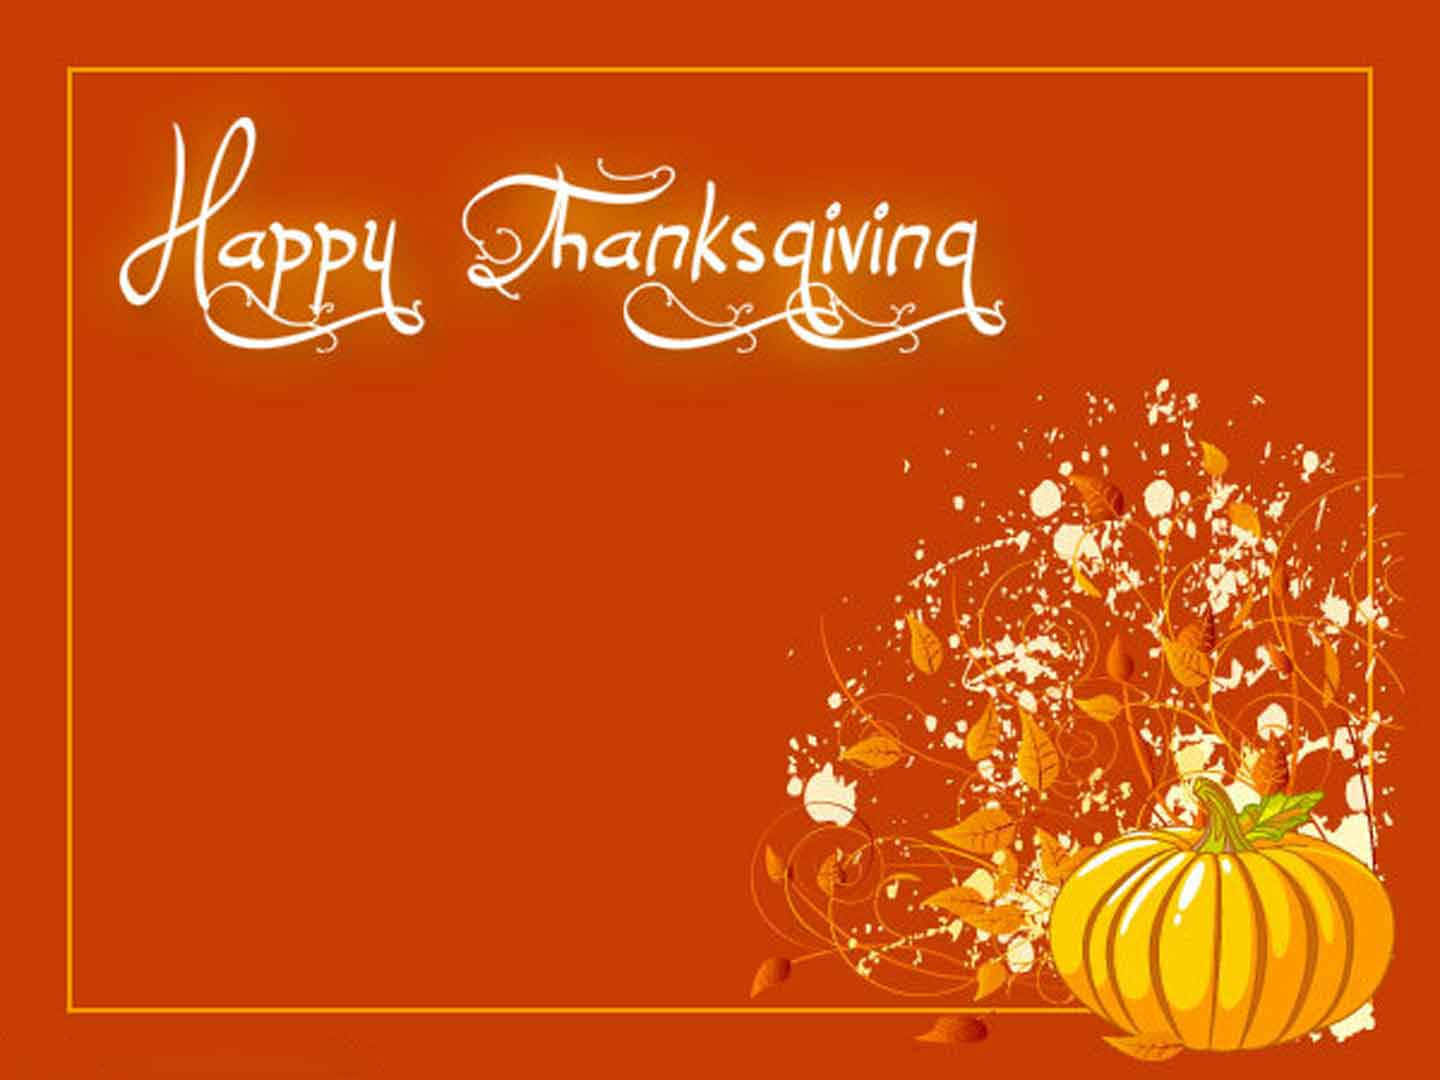 “Warm wishes for a wonderful Thanksgiving” Wallpaper